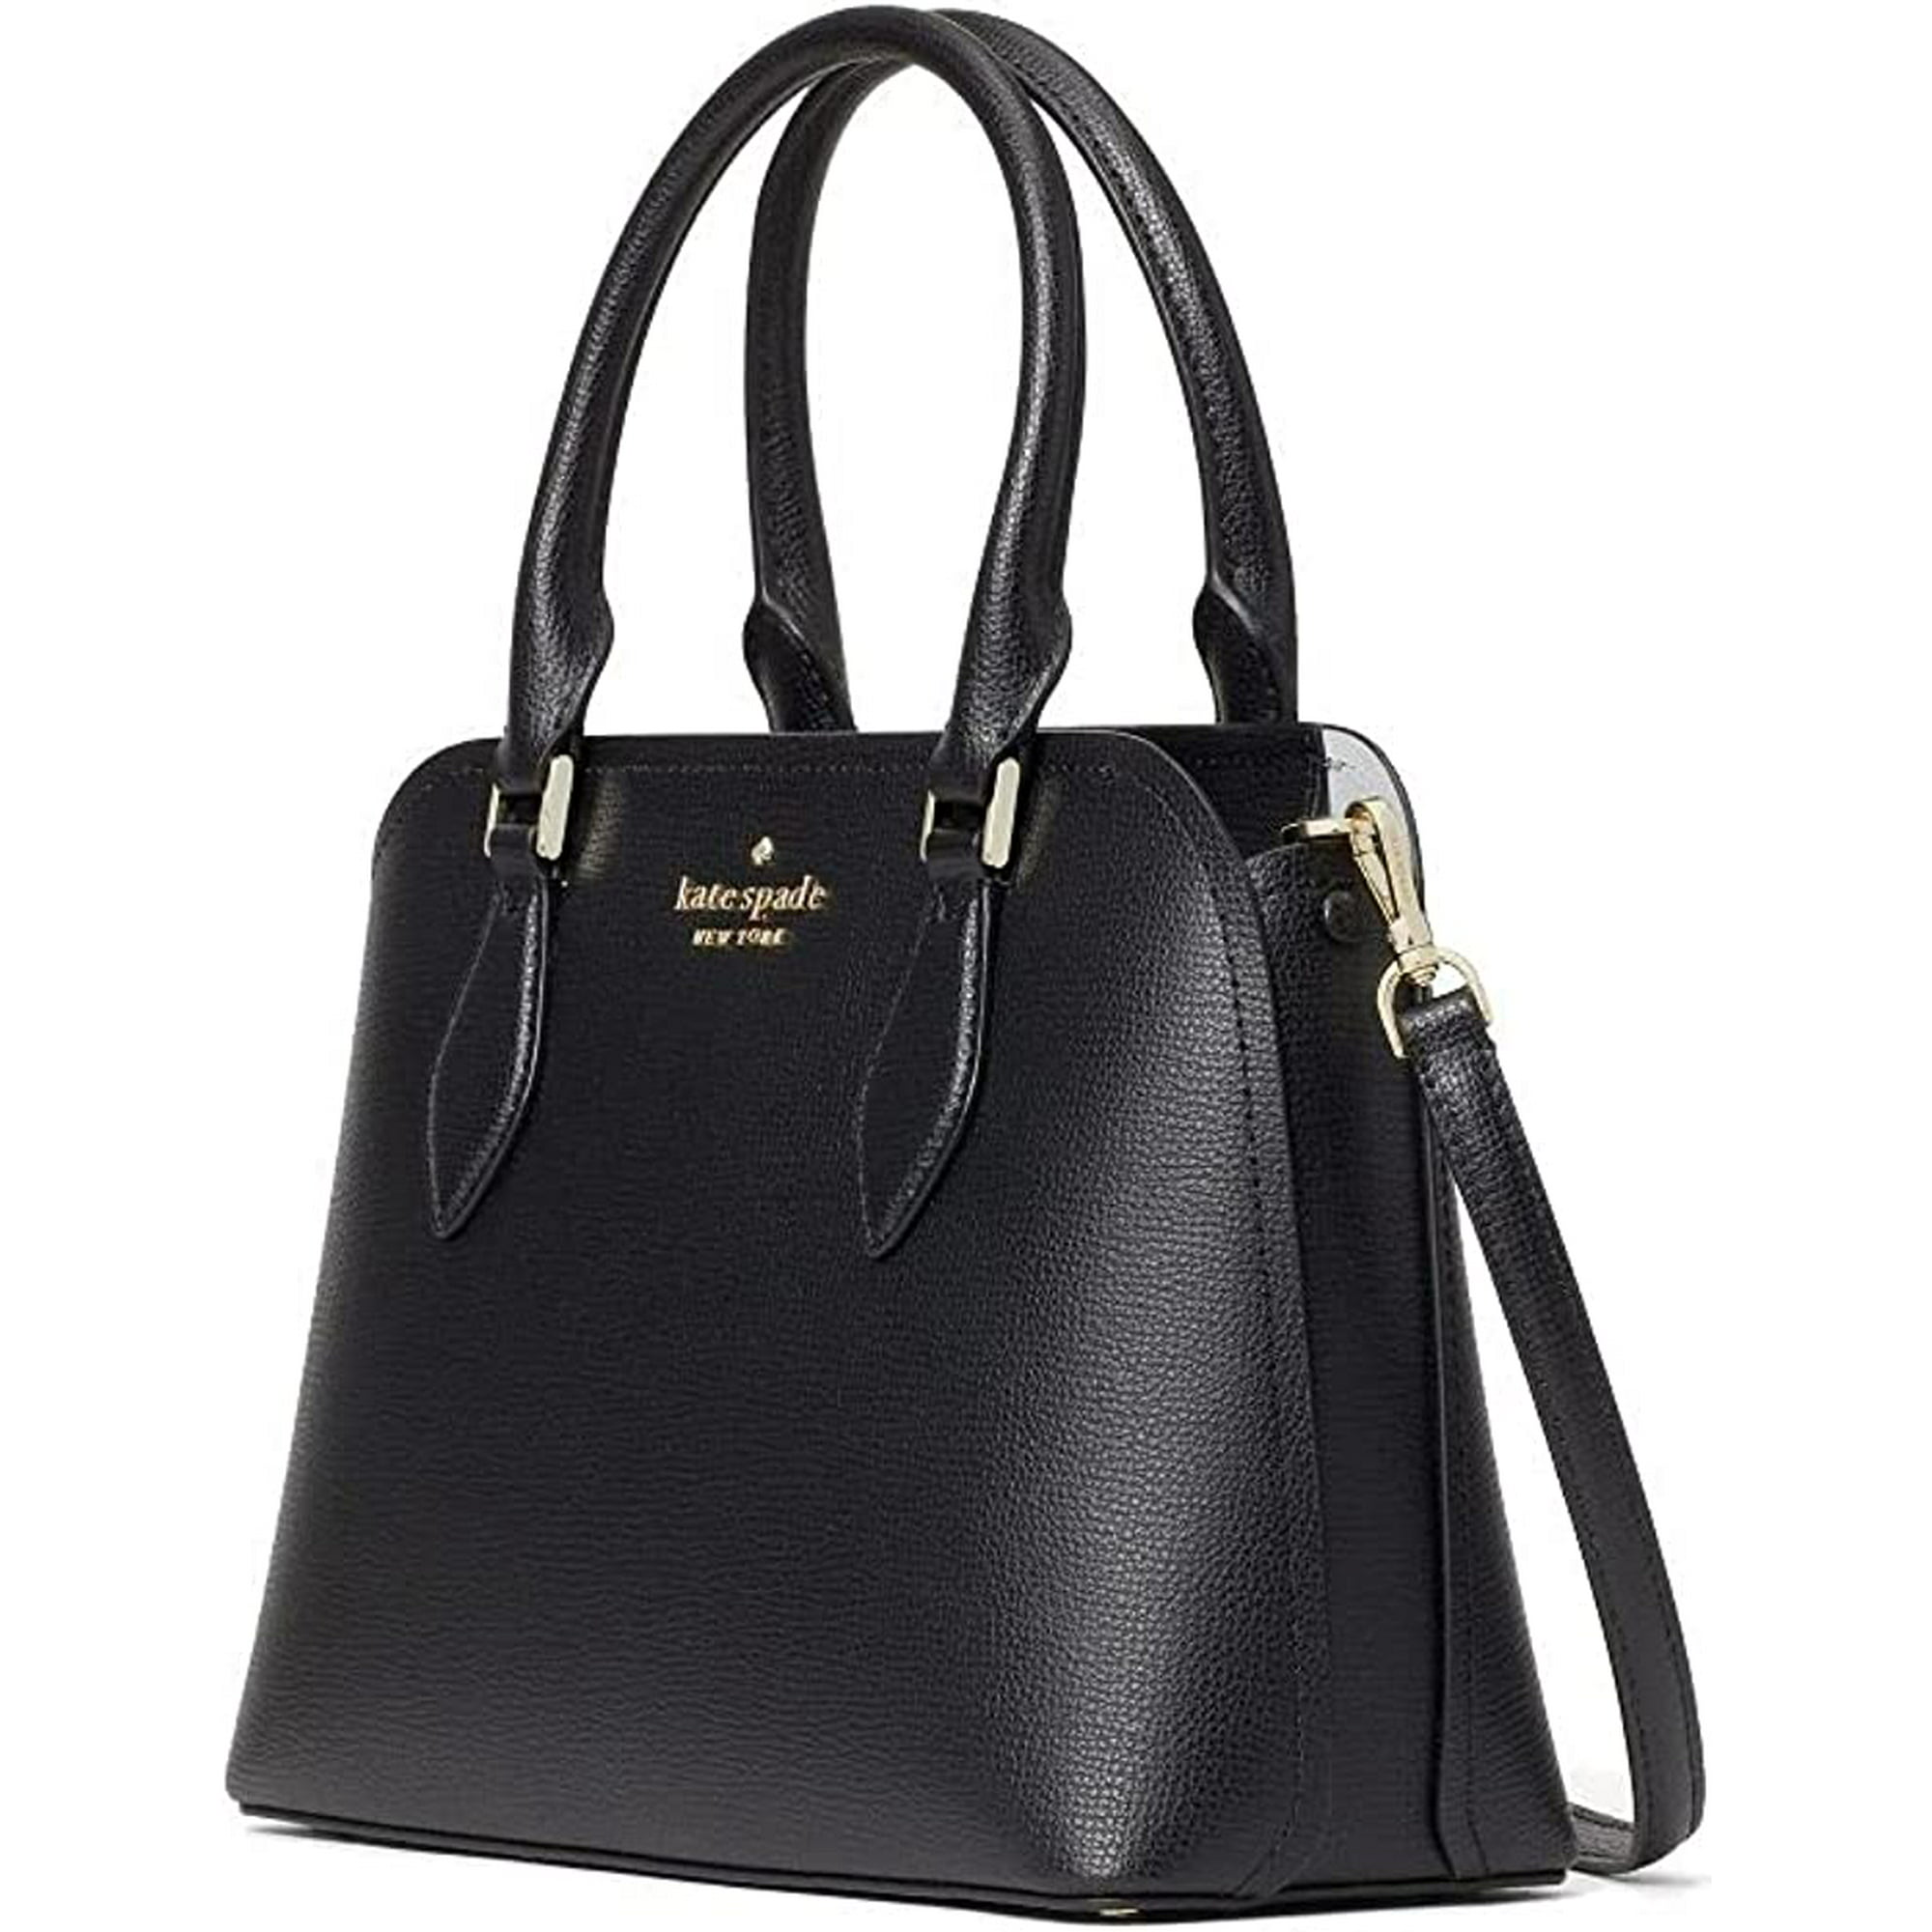 Kate Spade small leather satchel 